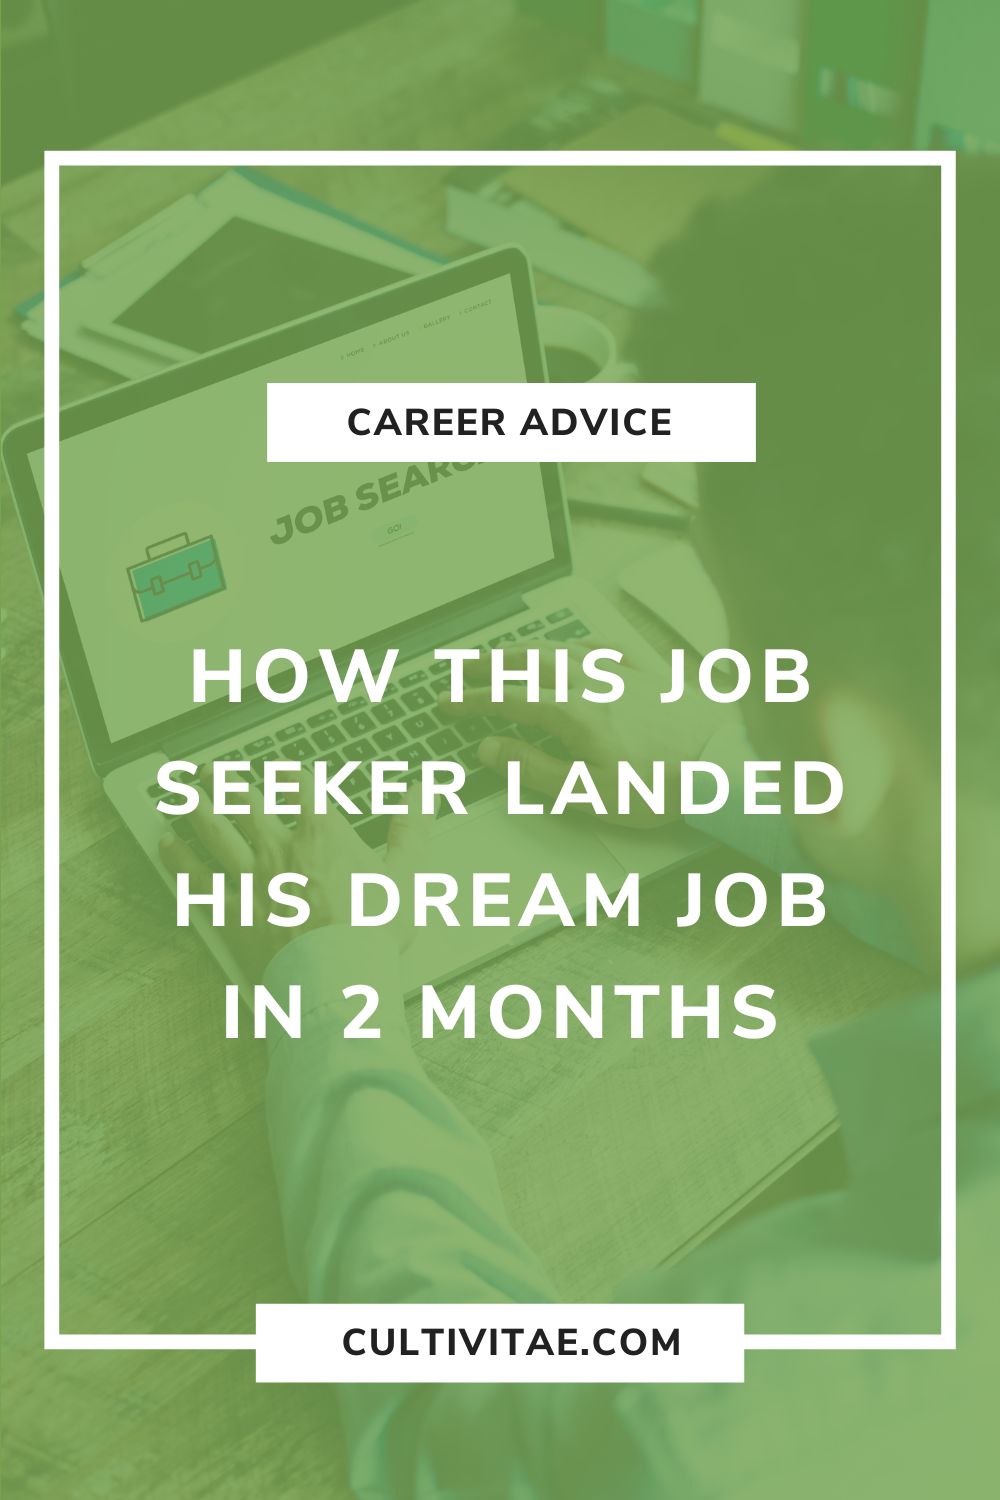 Case Study: How This Job Seeker Landed His Dream Job in 2 Months